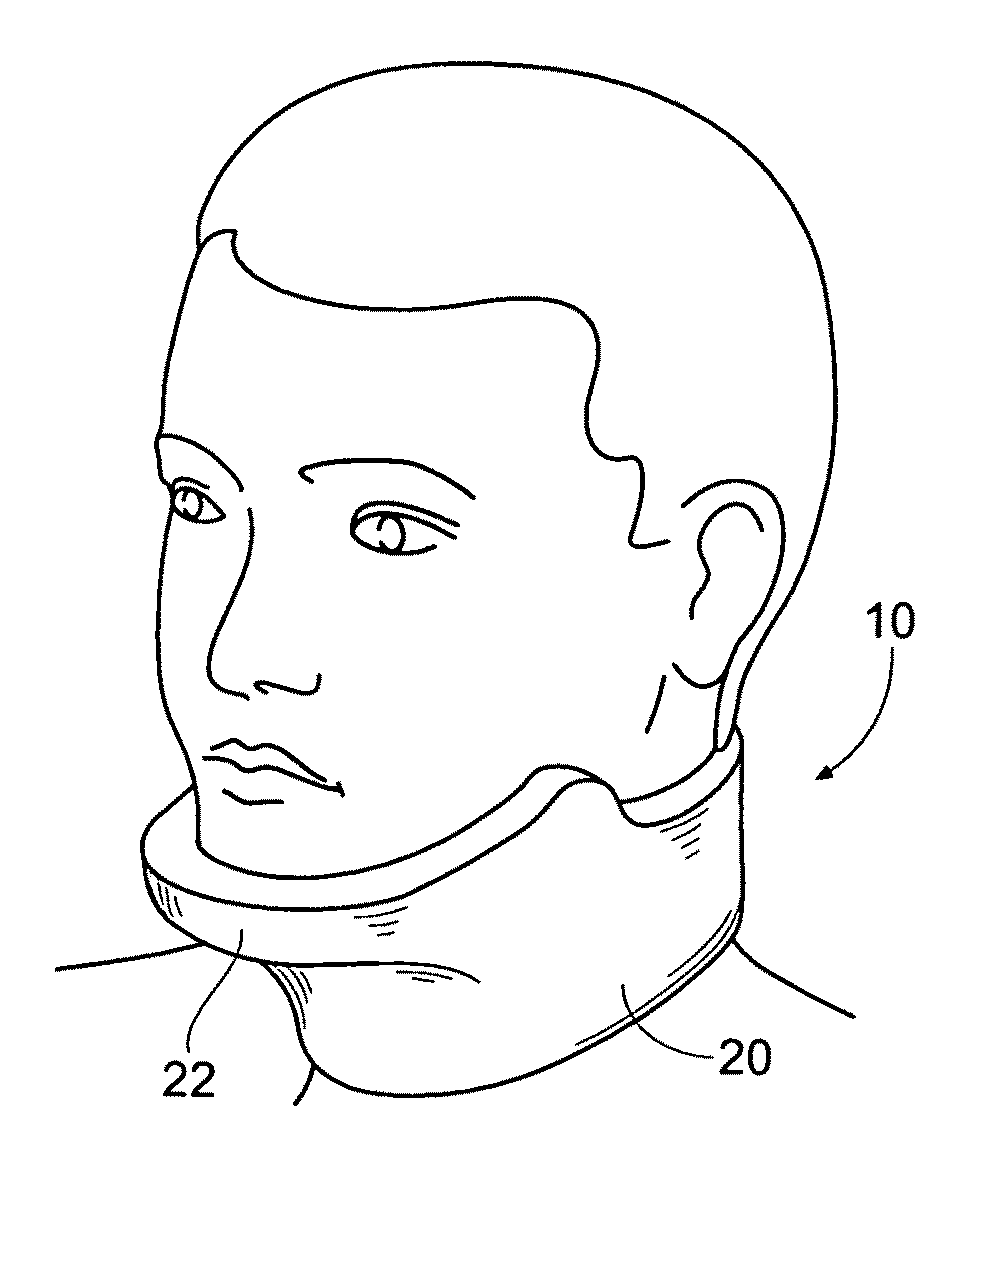 Apparatus, systems, and methods for constraining and/or supporting tissue structures along an airway